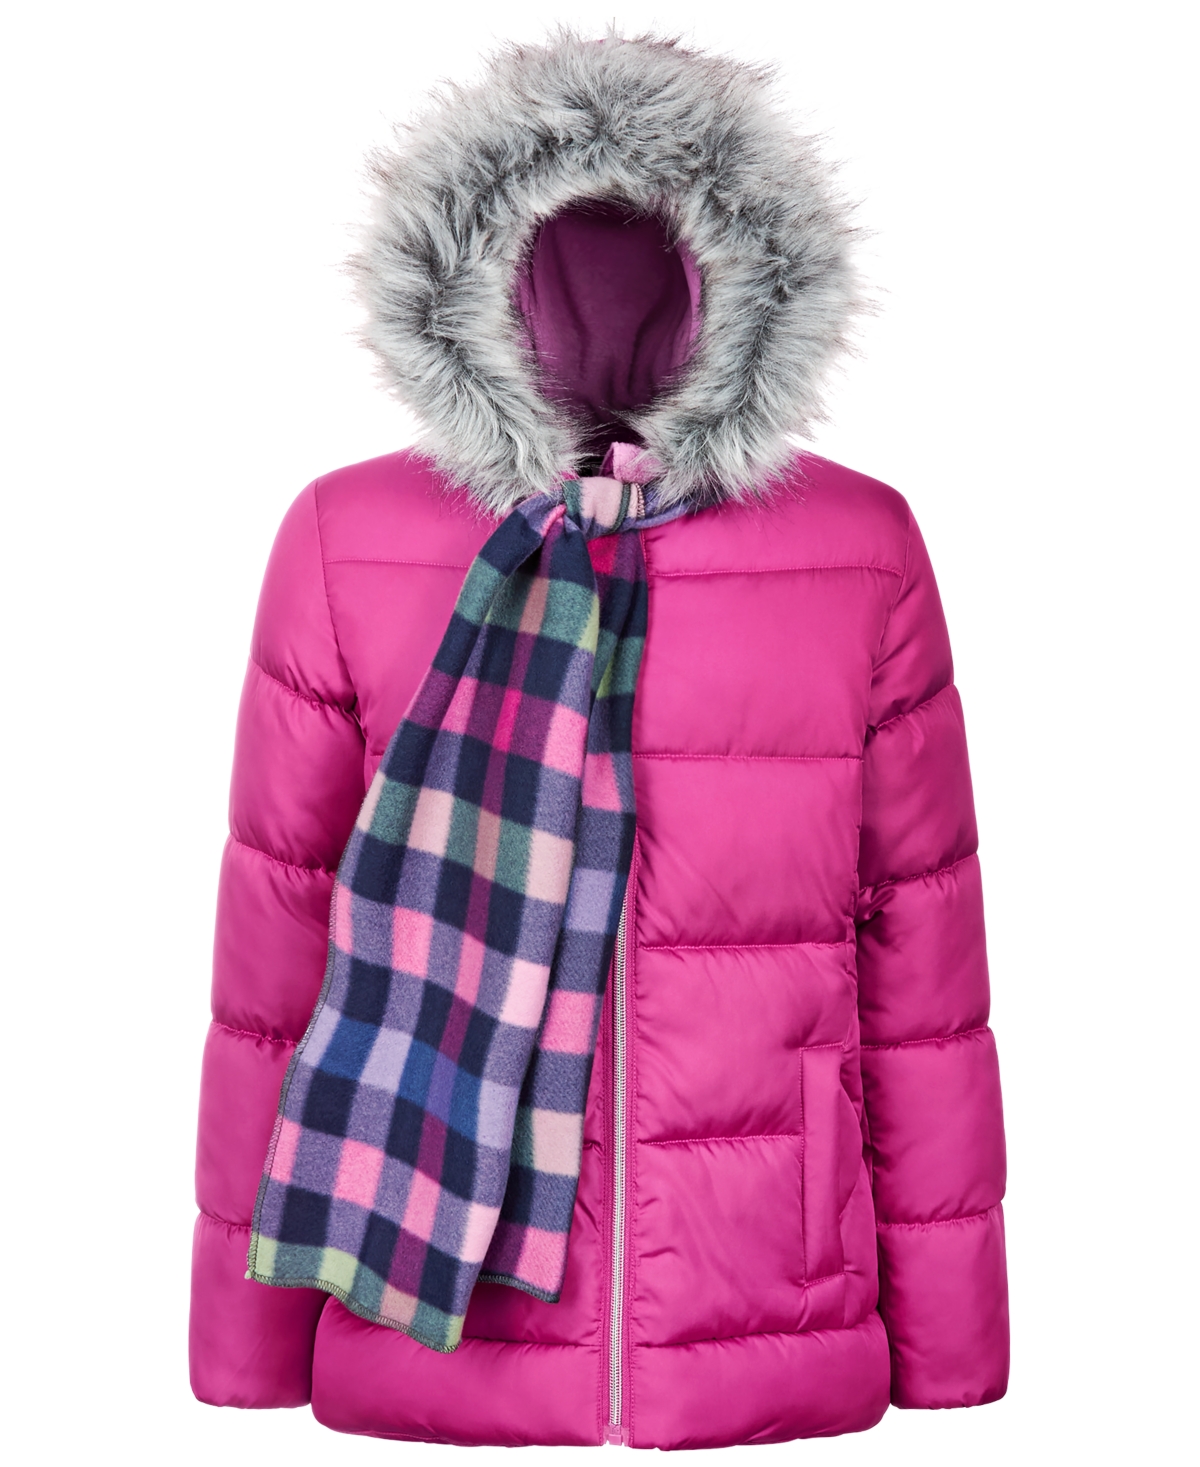 S Rothschild & Co Big Girls Solid Quilt Puffer Coat & Plaid Scarf In Raspberry